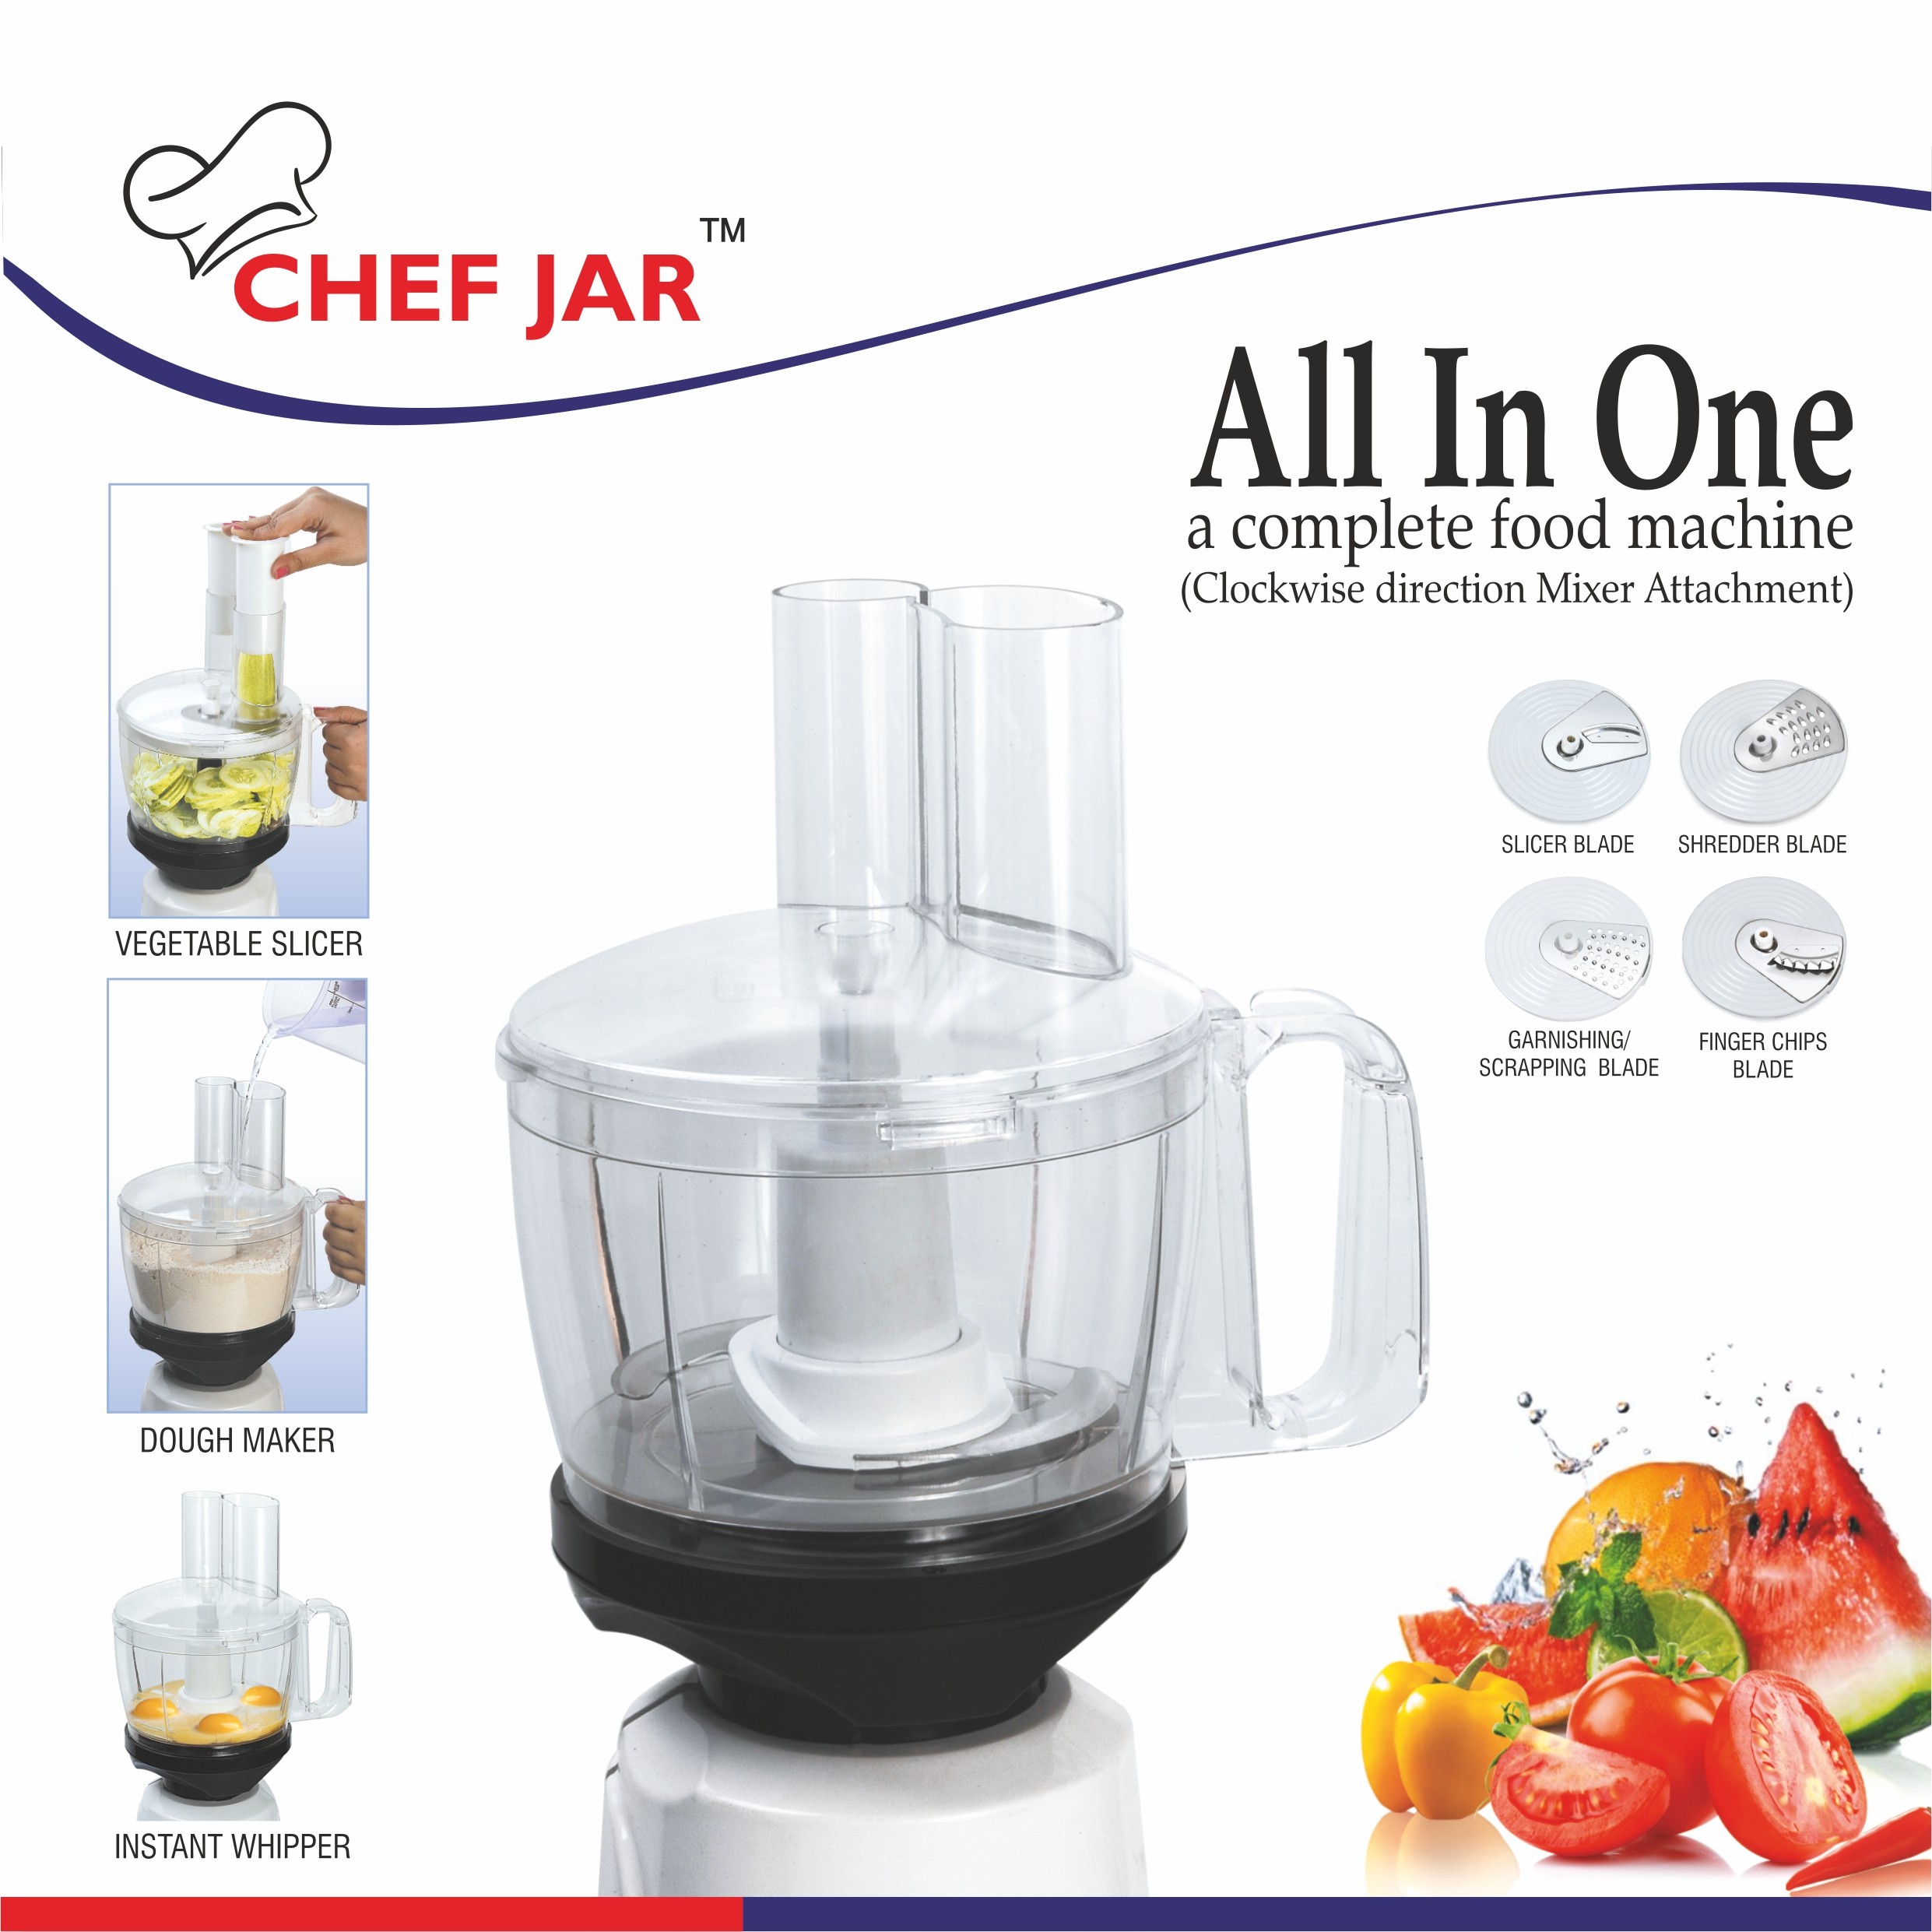 chef-jar-all-in-one-a-complete-food-processor-attachment-for-most-indian-mixer-grinders-compatible-with-all-preethi-premier-models-except-preethi-steele